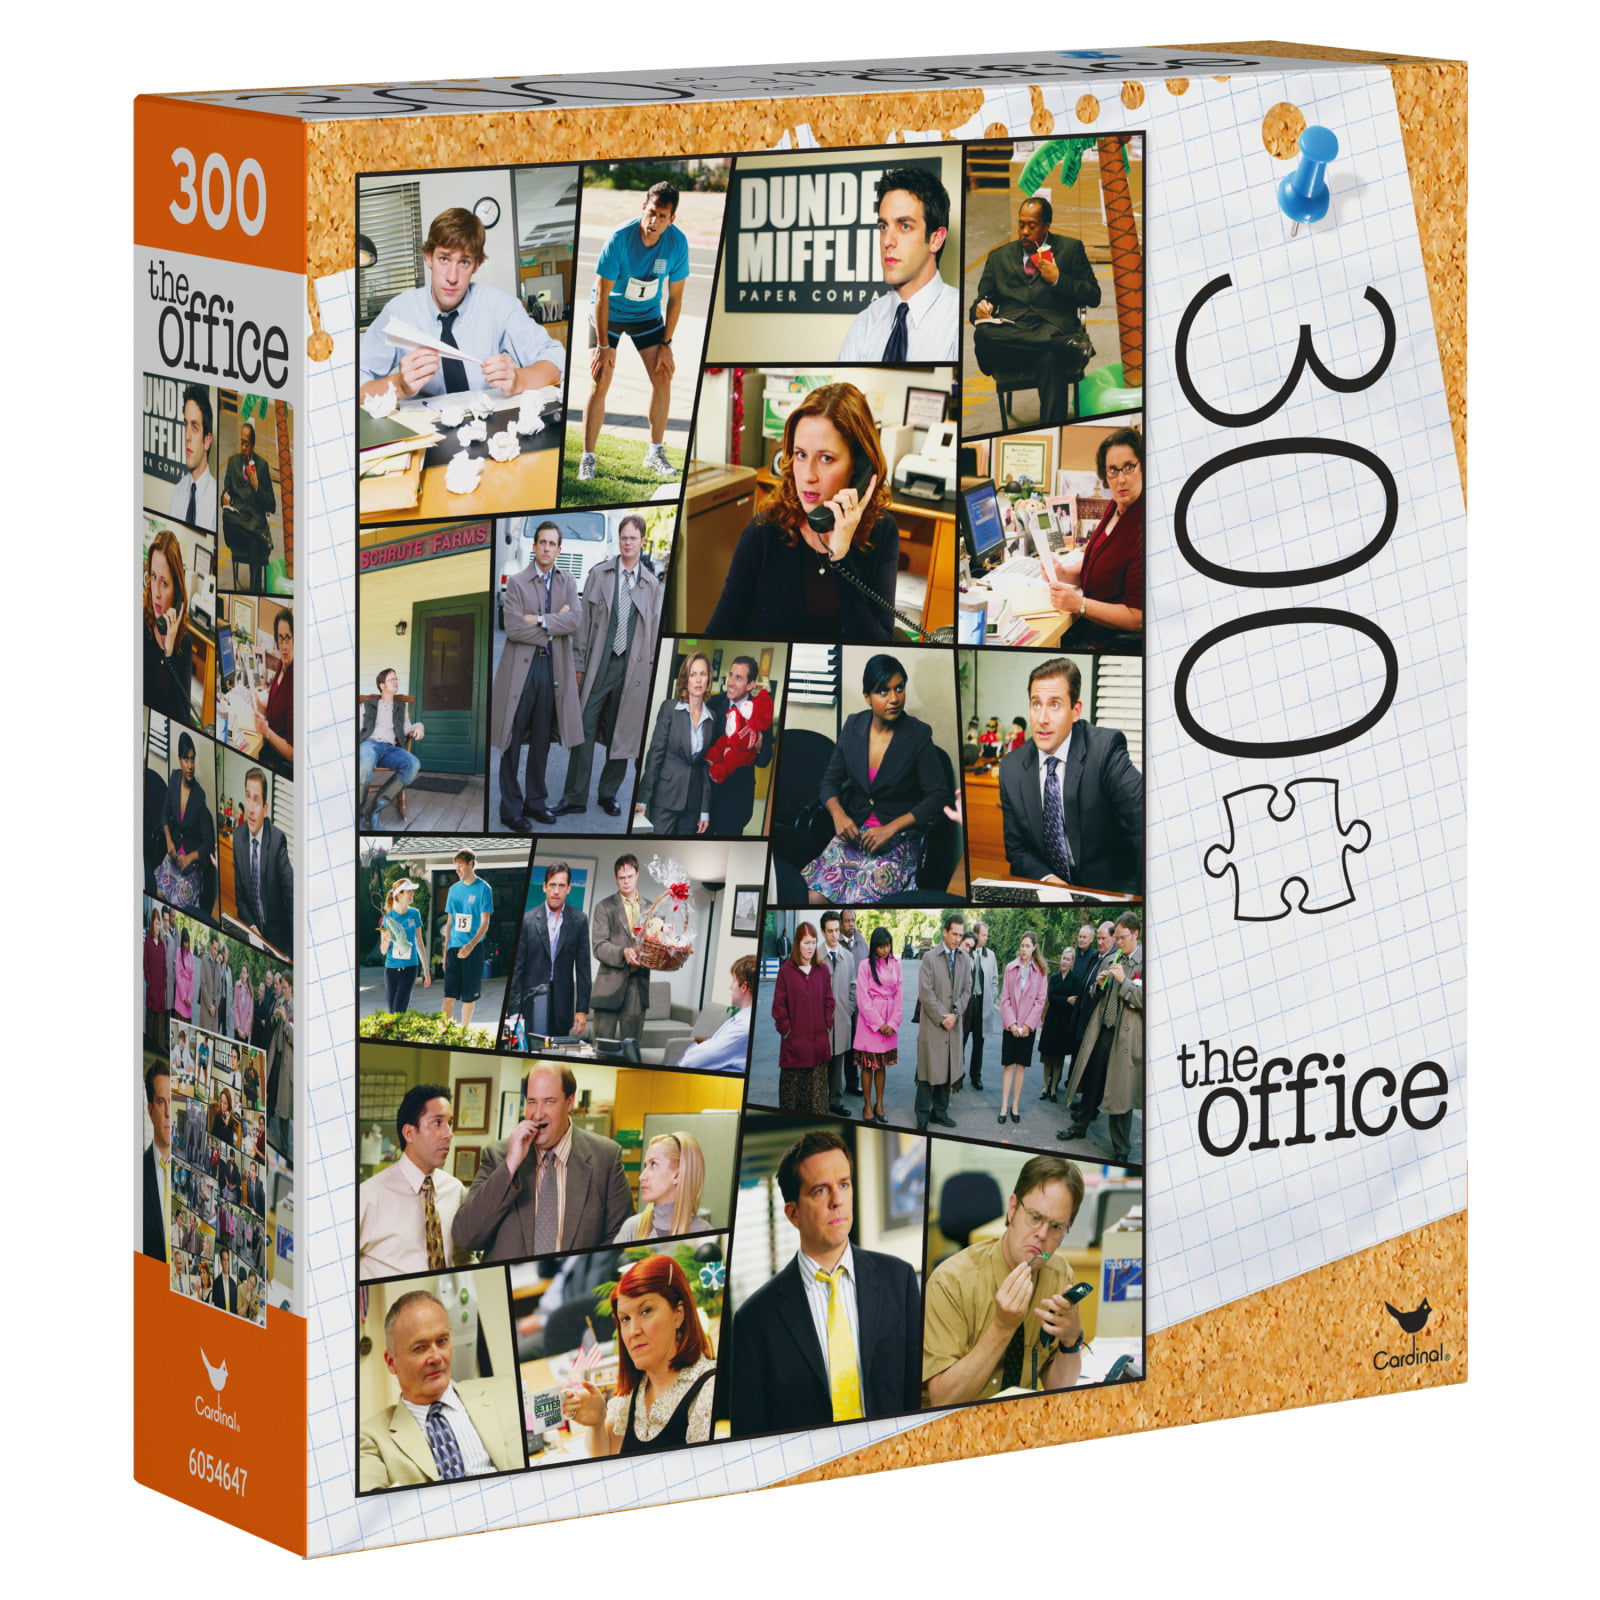 The Office 300 PC Jigsaw Puzzle 18x24 Cardinal 6054647 Photo Collage for sale online